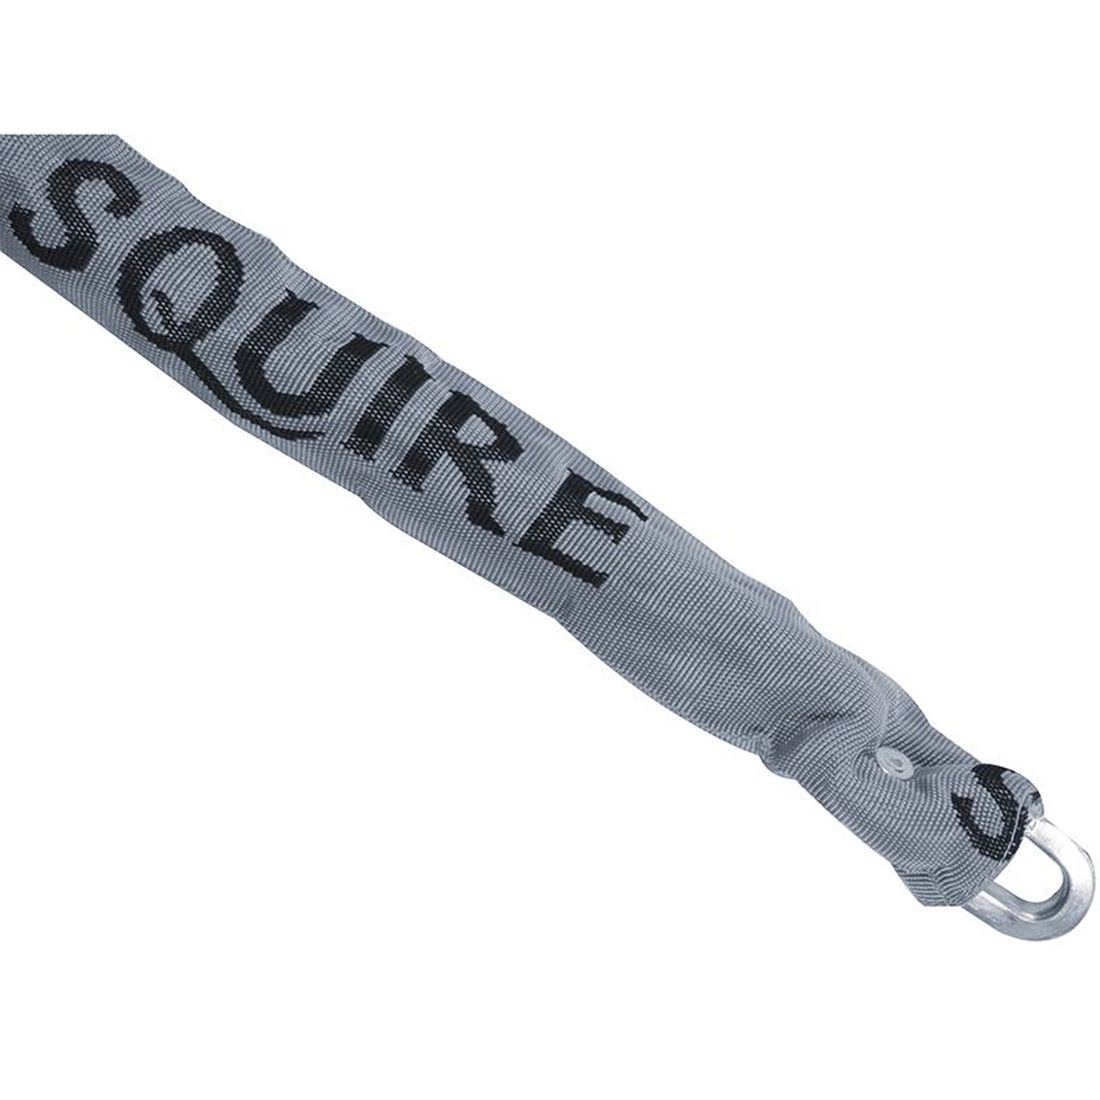 Squire X3 Square Section Hard Chain 90cm x 8mm                                         